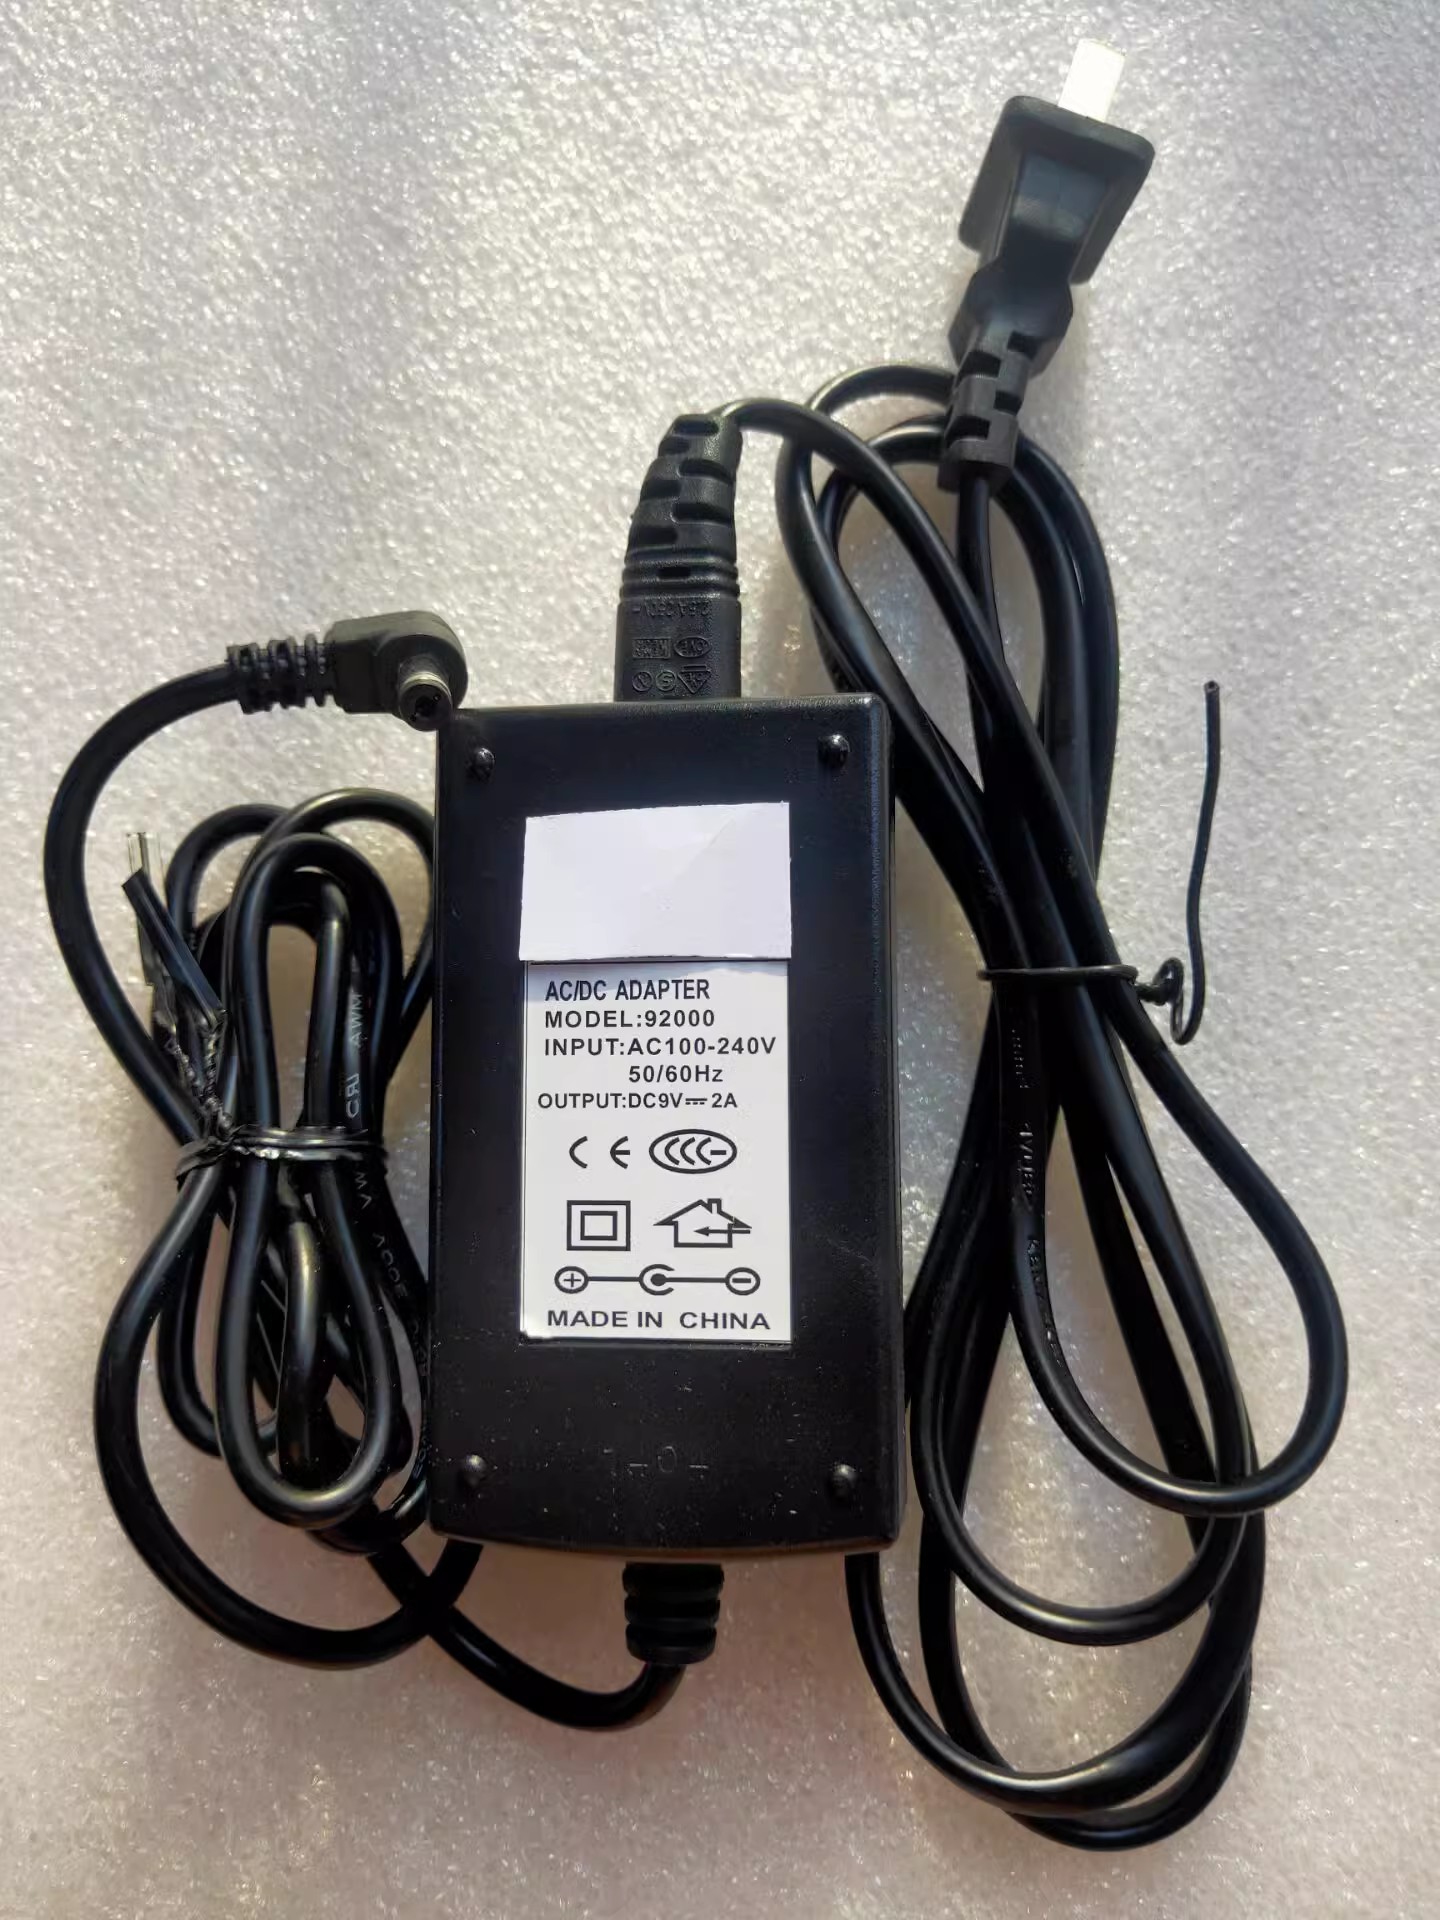 *Brand NEW* NUX DM2 3 4 5 92000 ACD-008A-CN 9V 1-2A AC DC ADAPTHE POWER Supply